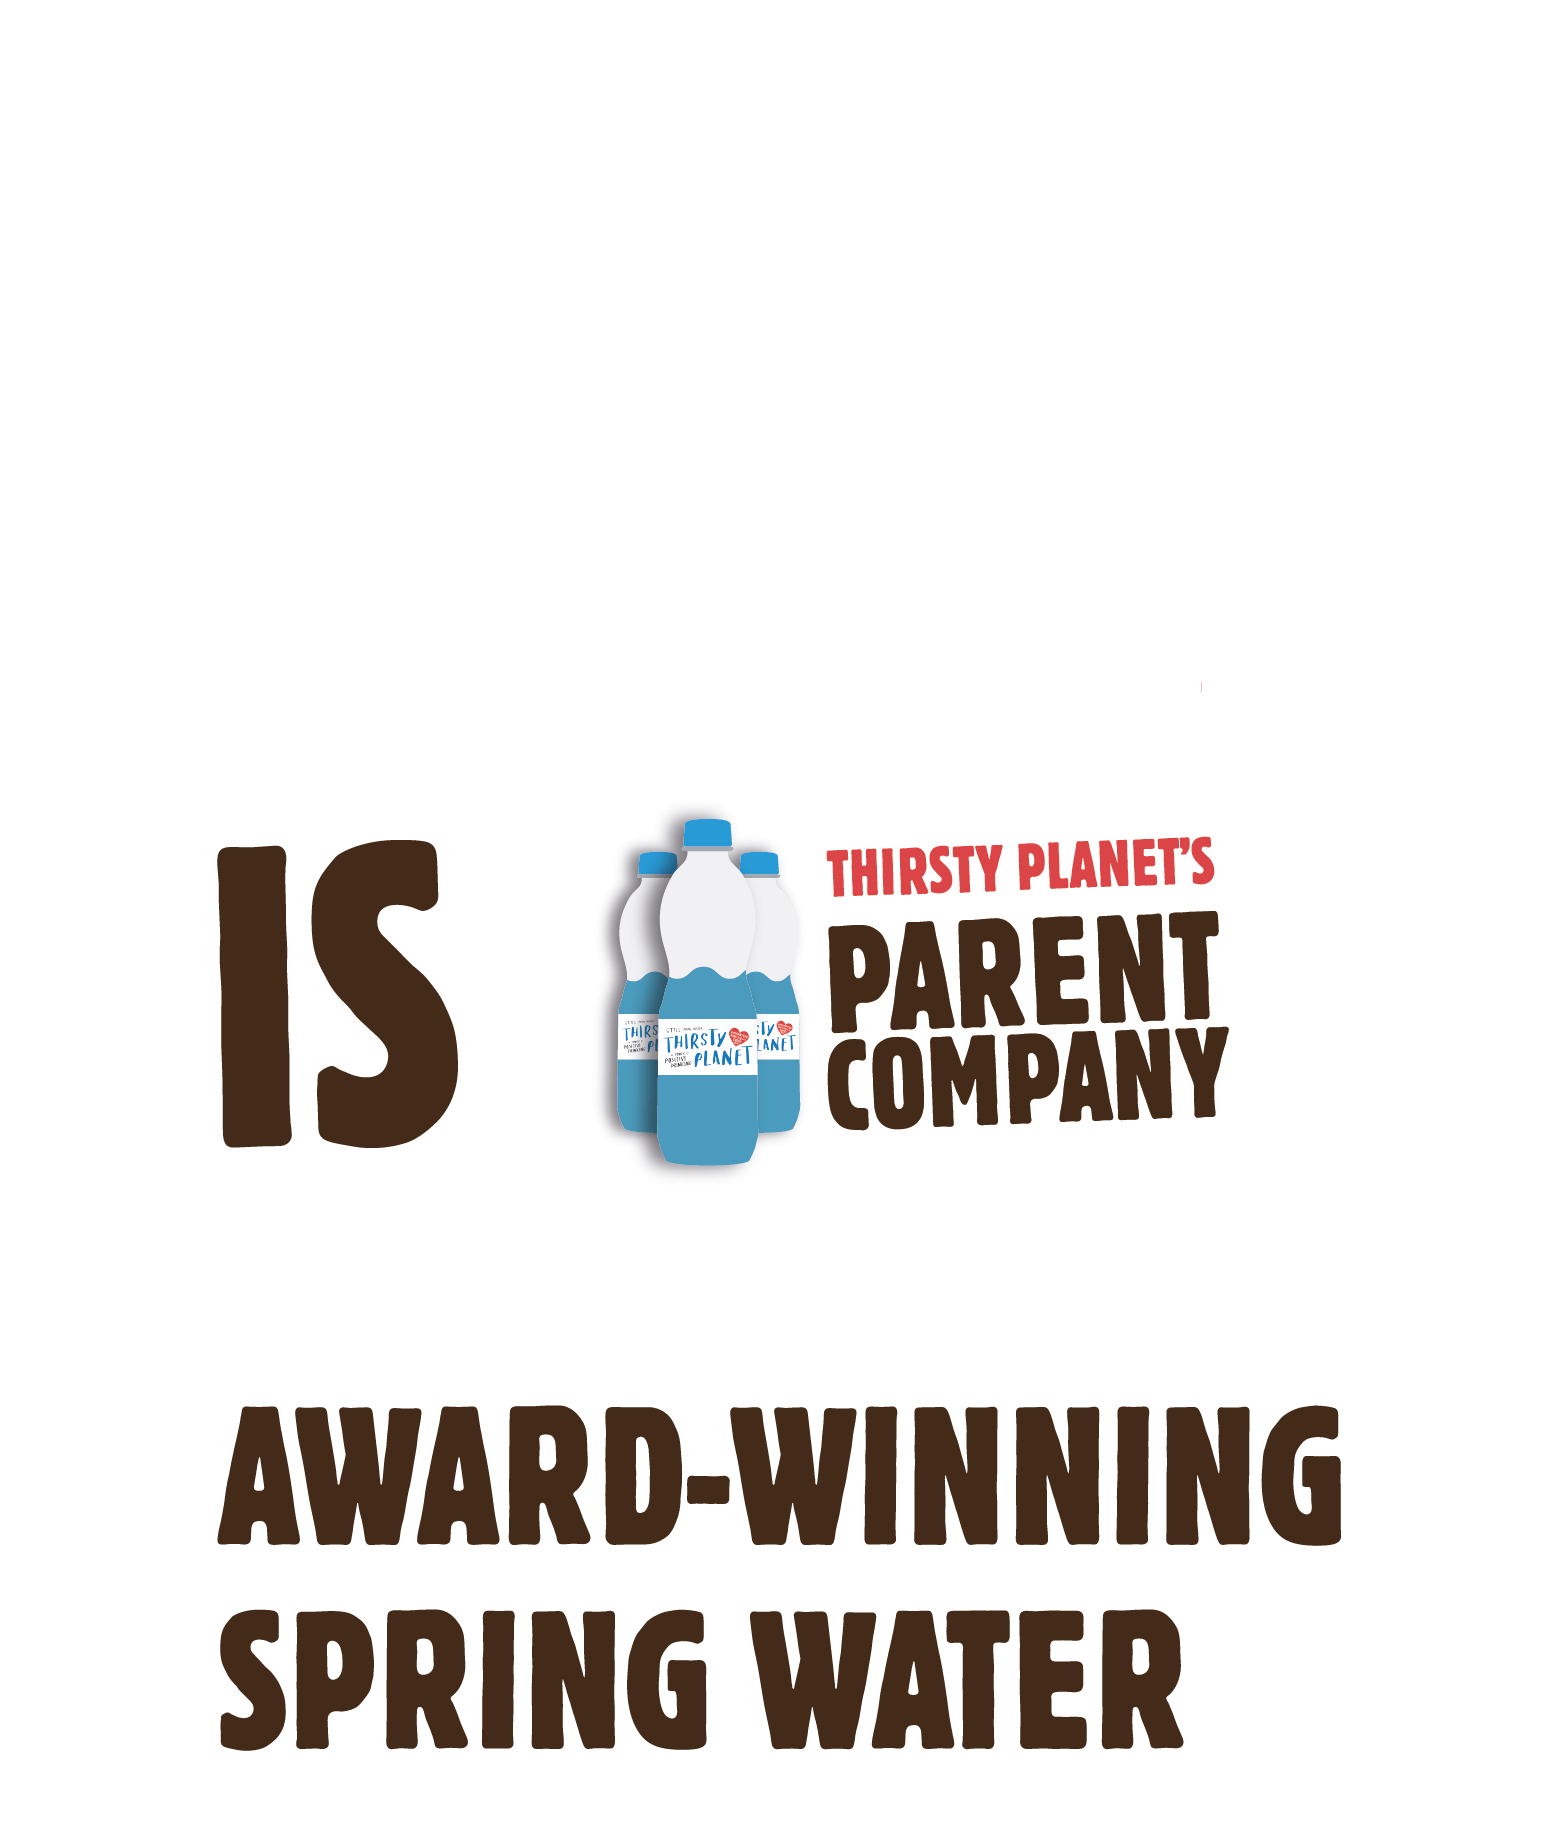 Harrogate Spring Water is Thirsty Planet's parent company. Award-winning spring water.